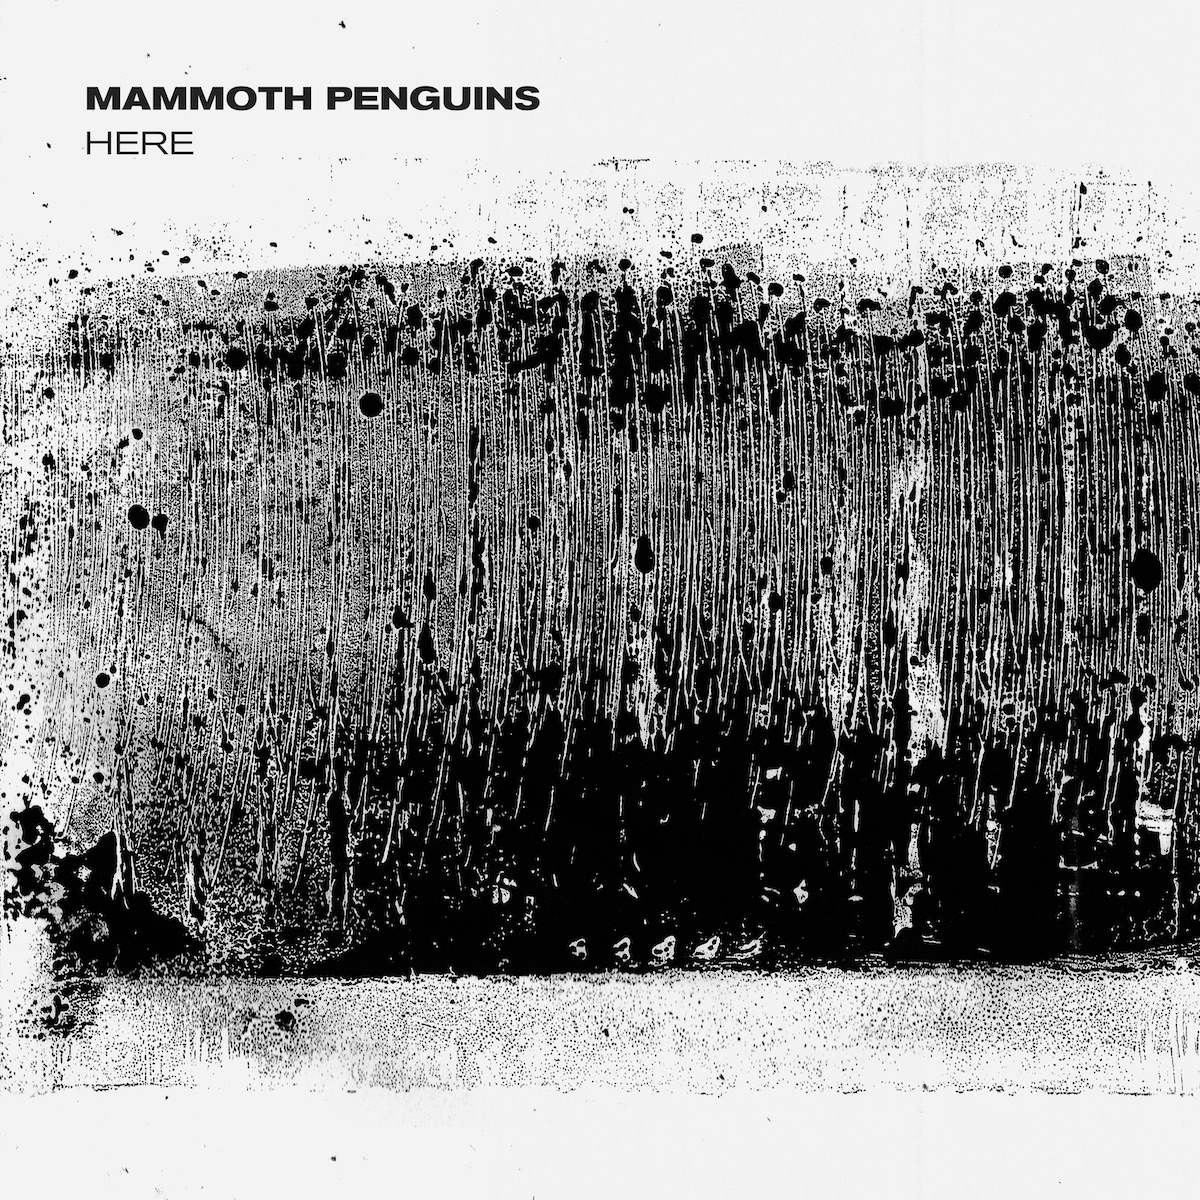 ALBUM REVIEW: Here by Mammoth Penguins